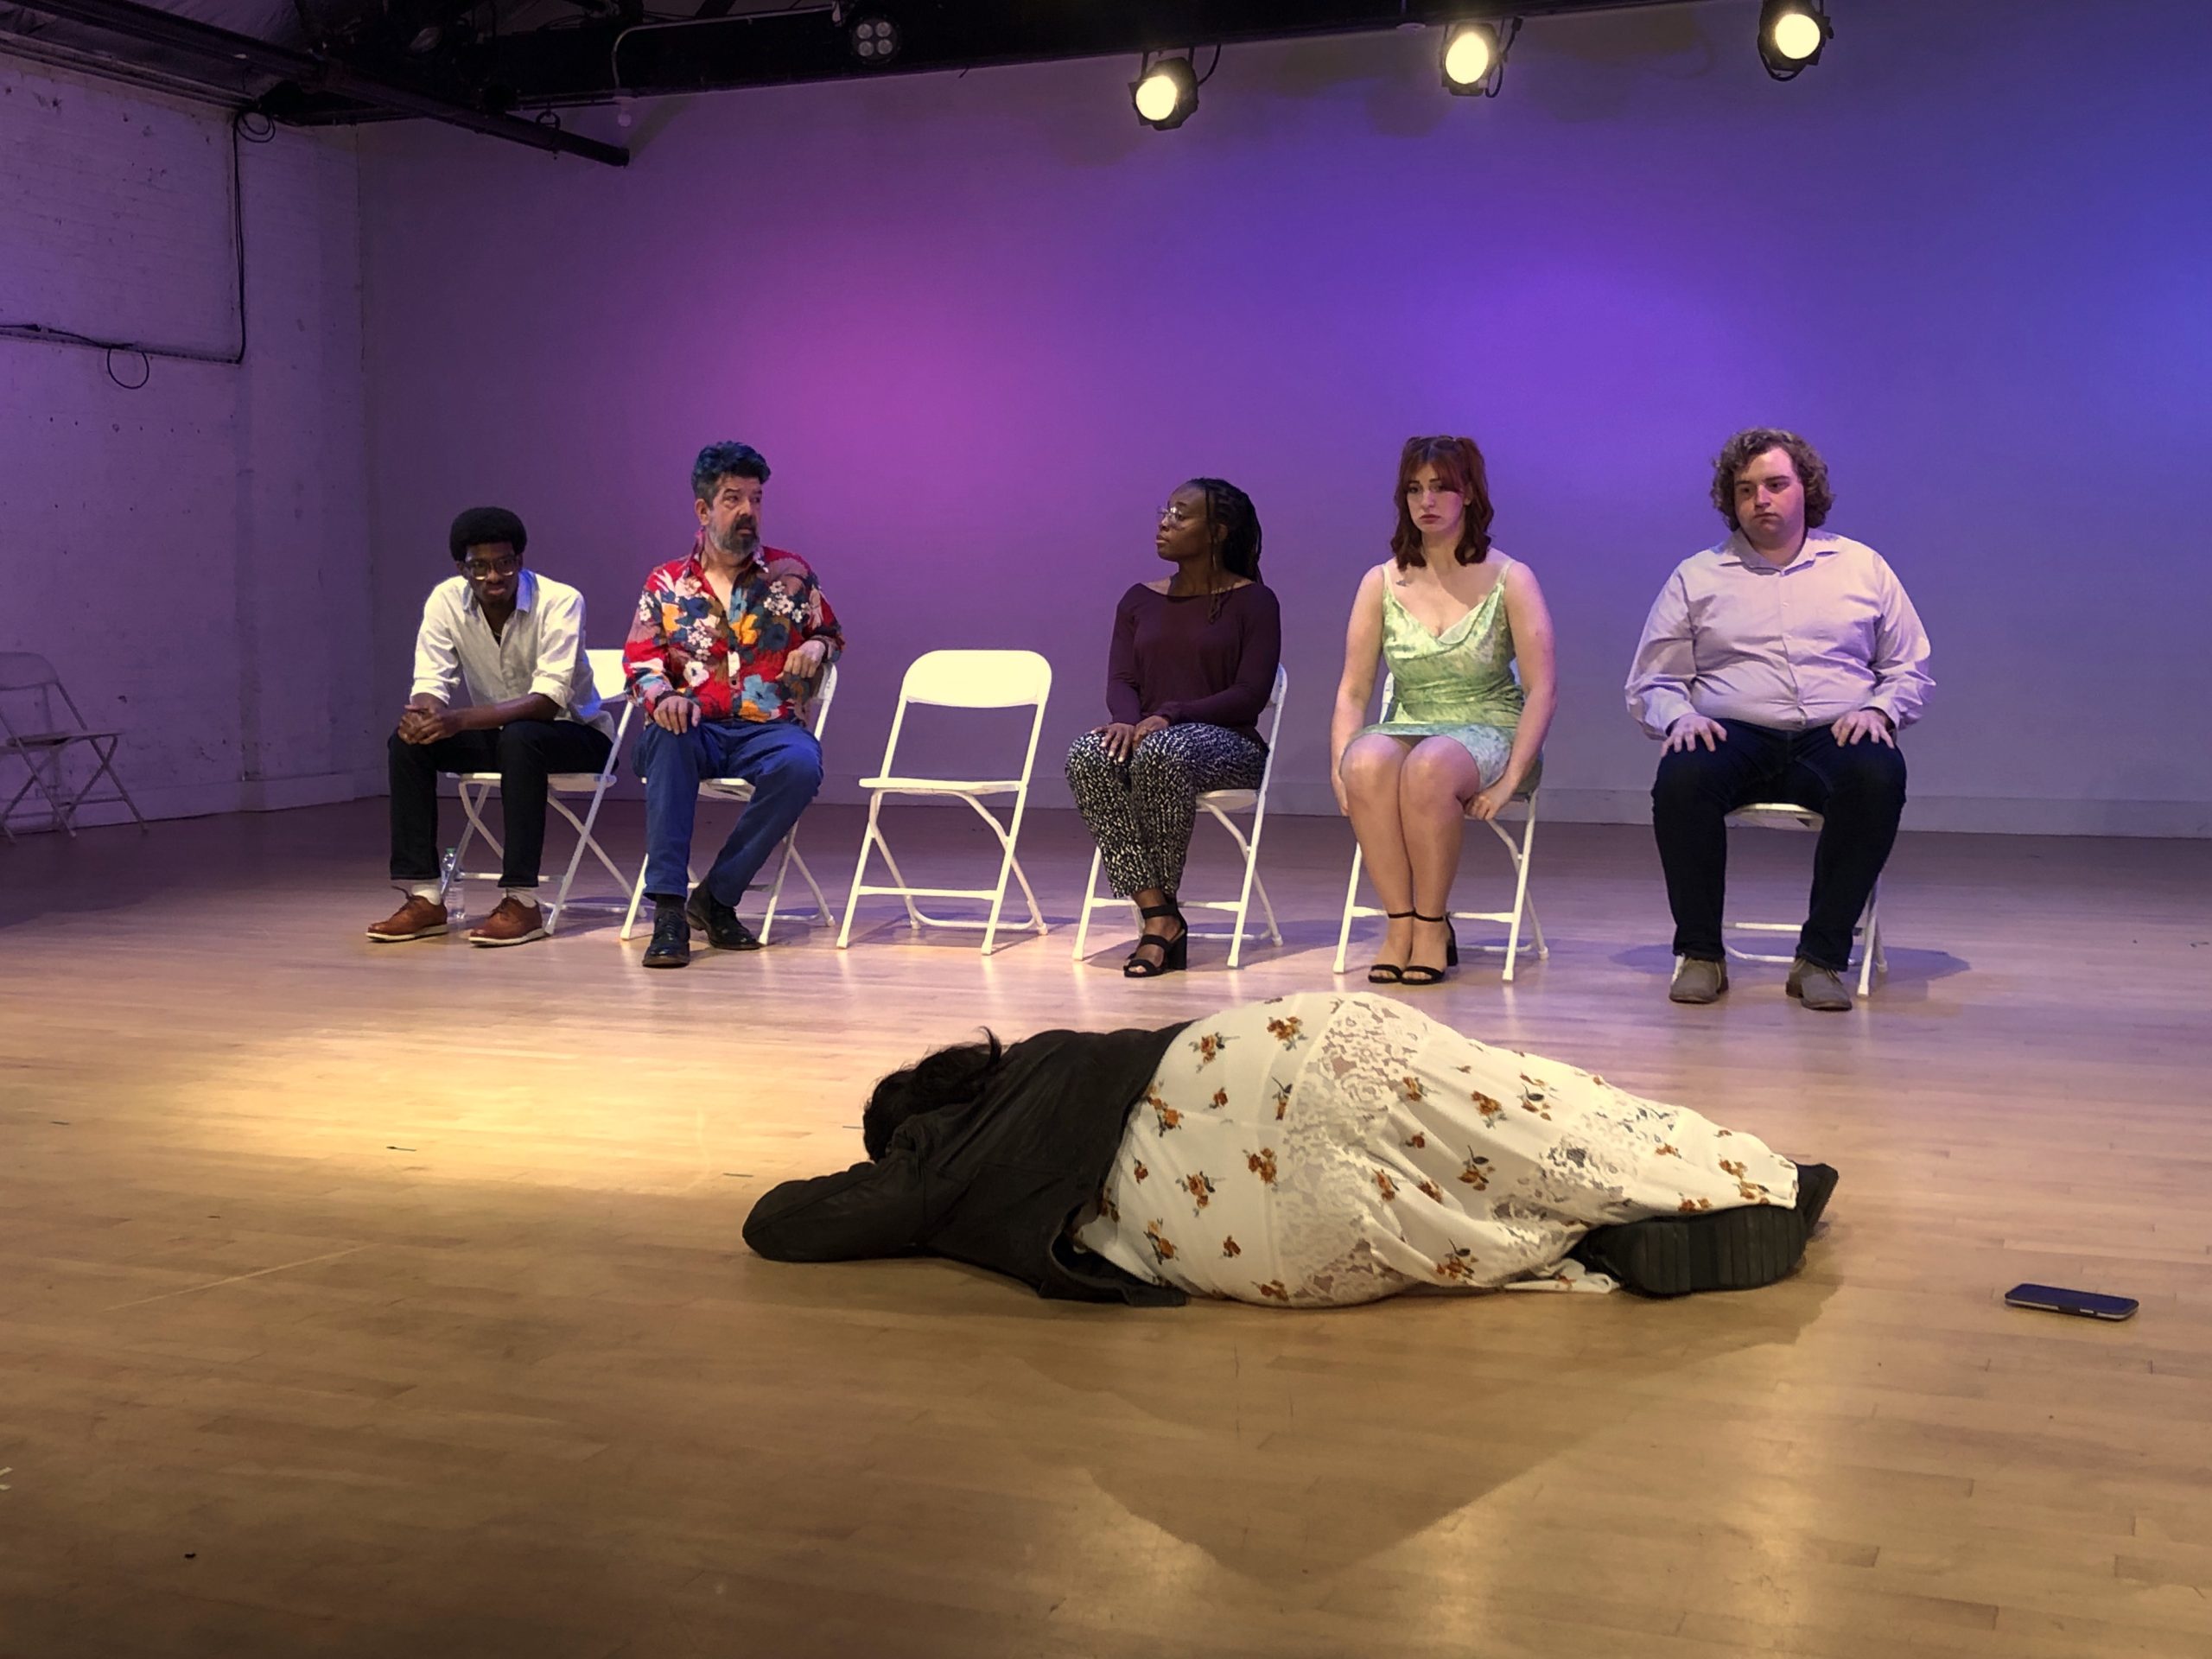 Image: Seated in a row on white folding chairs are Malik Middleton, Donaldson Cardenas, an empty chair, then OOshene Fox, Megan Kueter, and Michael Oakes. Lying on the light wooden floor before all of them is Haley Bolithon, facing towards the rest. The back is lit purple and pink. Photo by Hugh Graham.